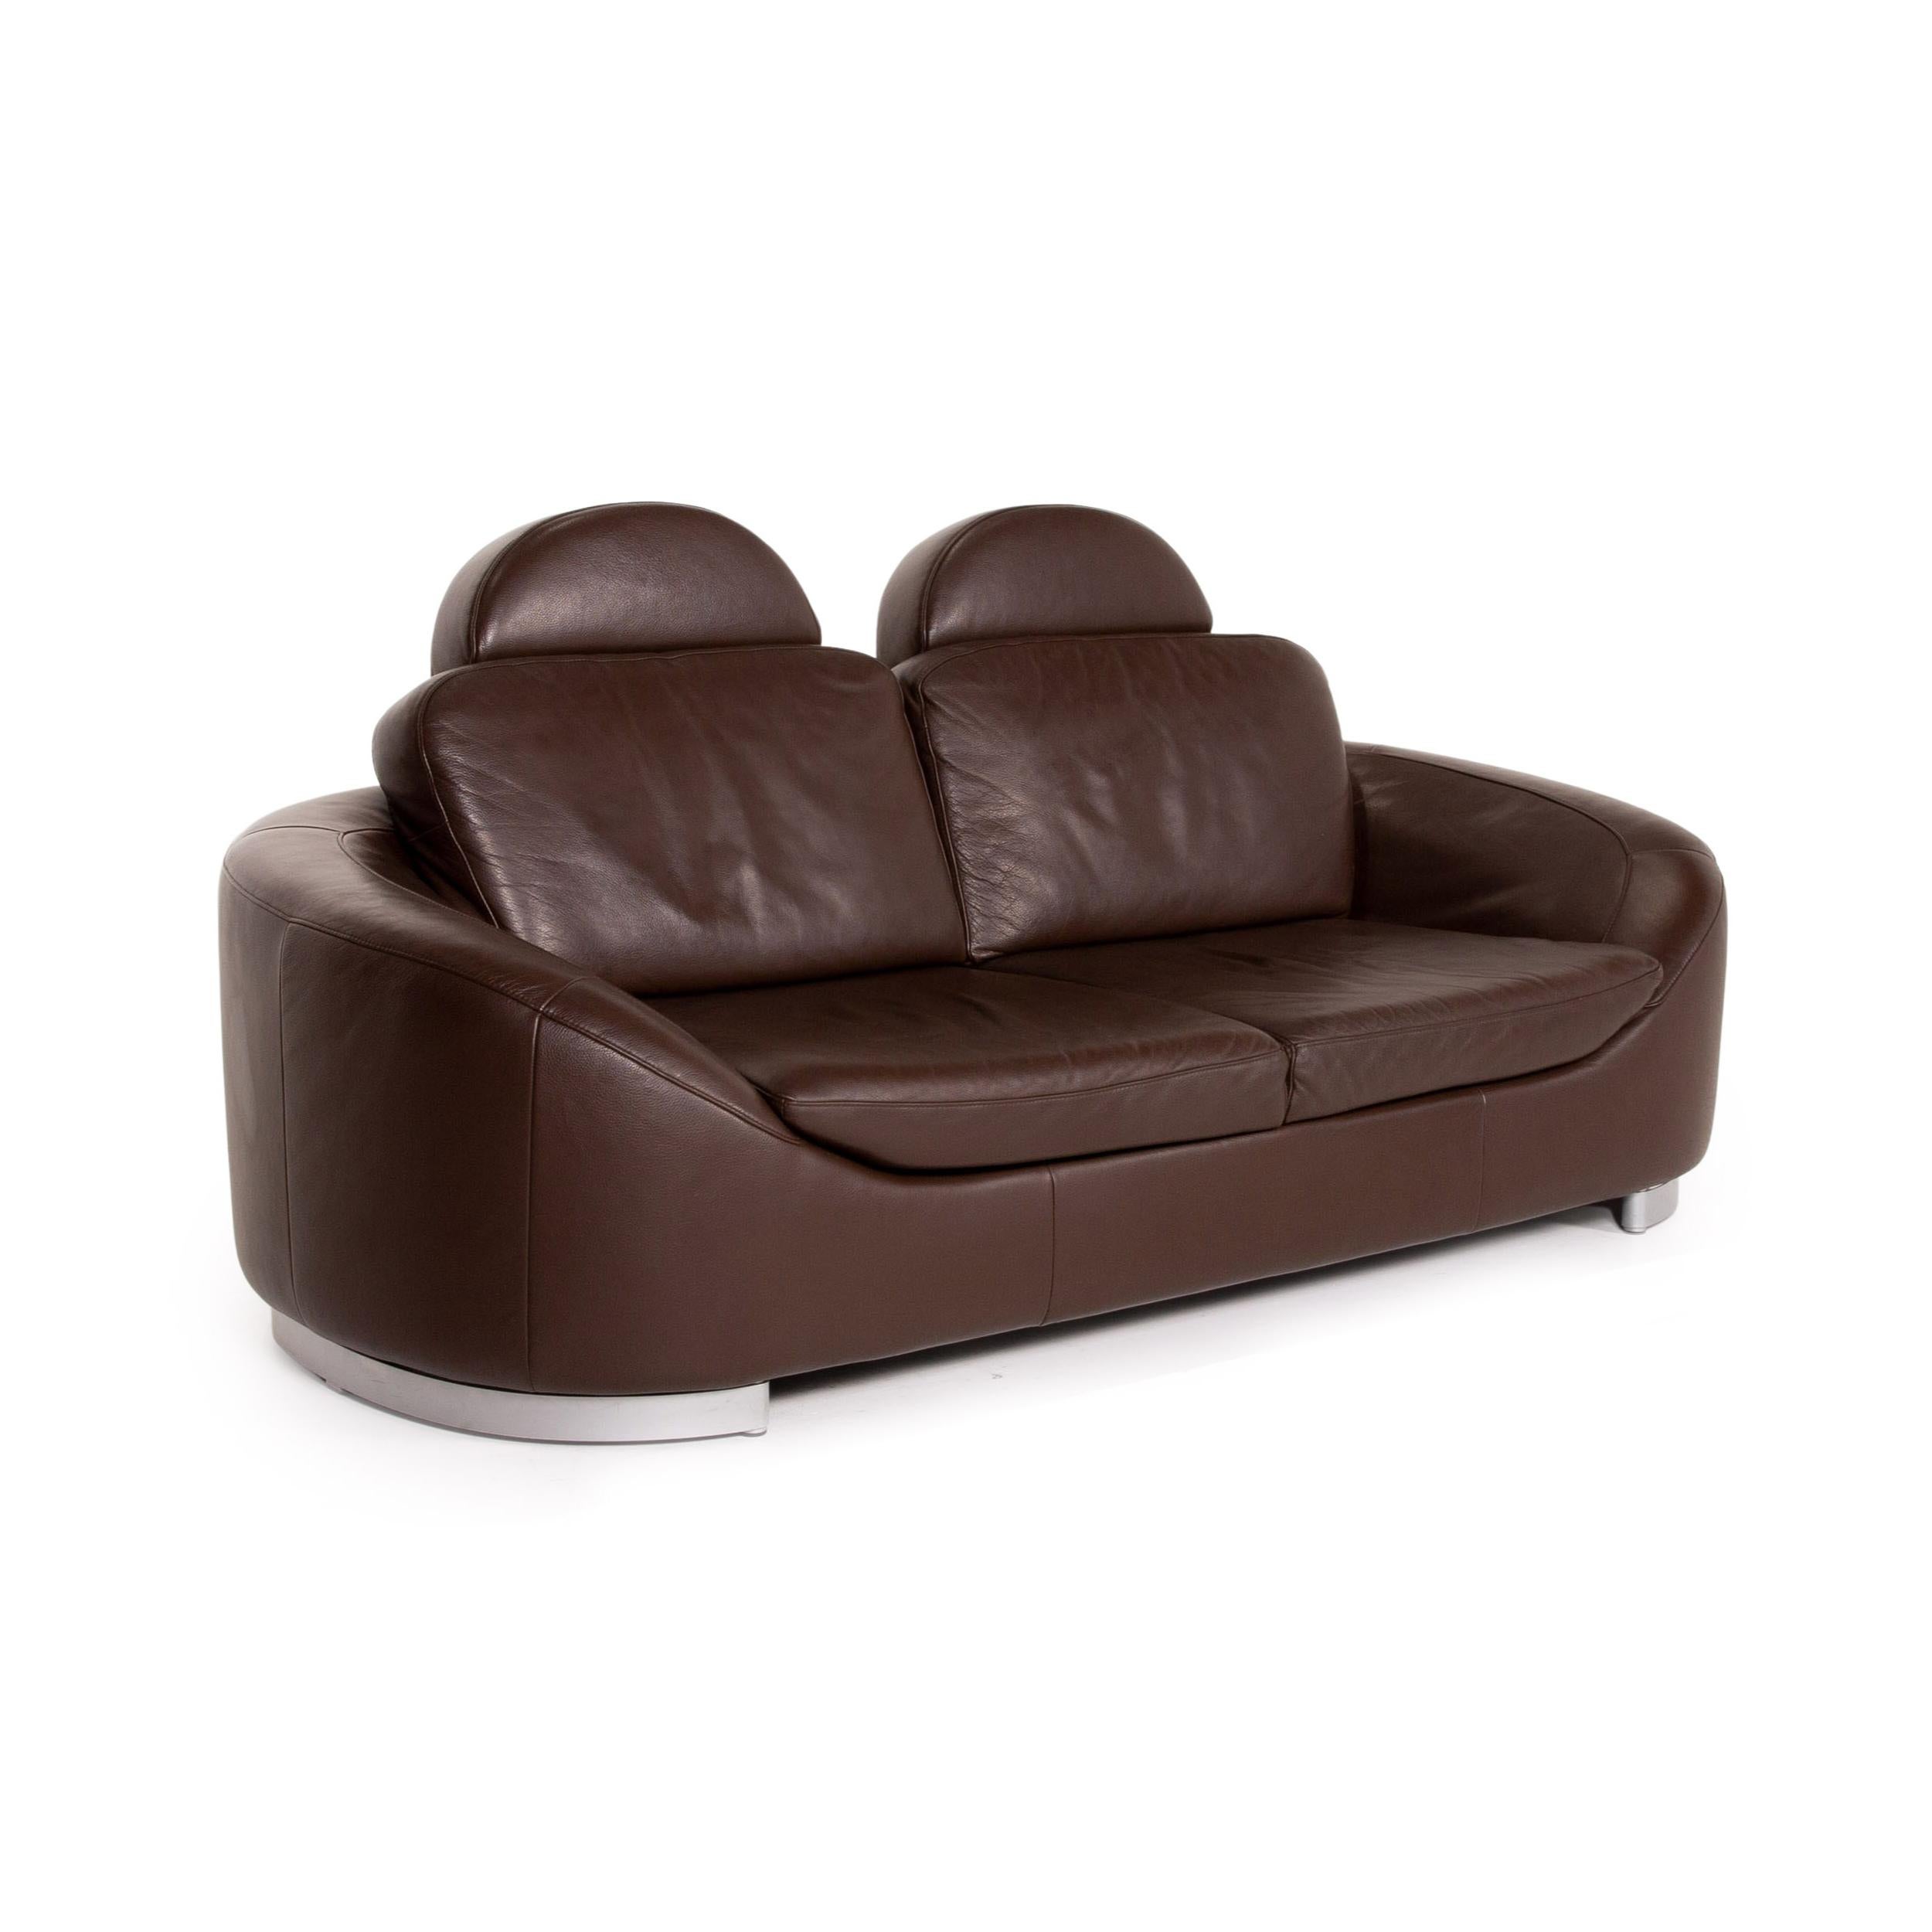 Ewald Schillig Leather Sofa Set Brown Dark Brown 2x Two-Seater For Sale 6